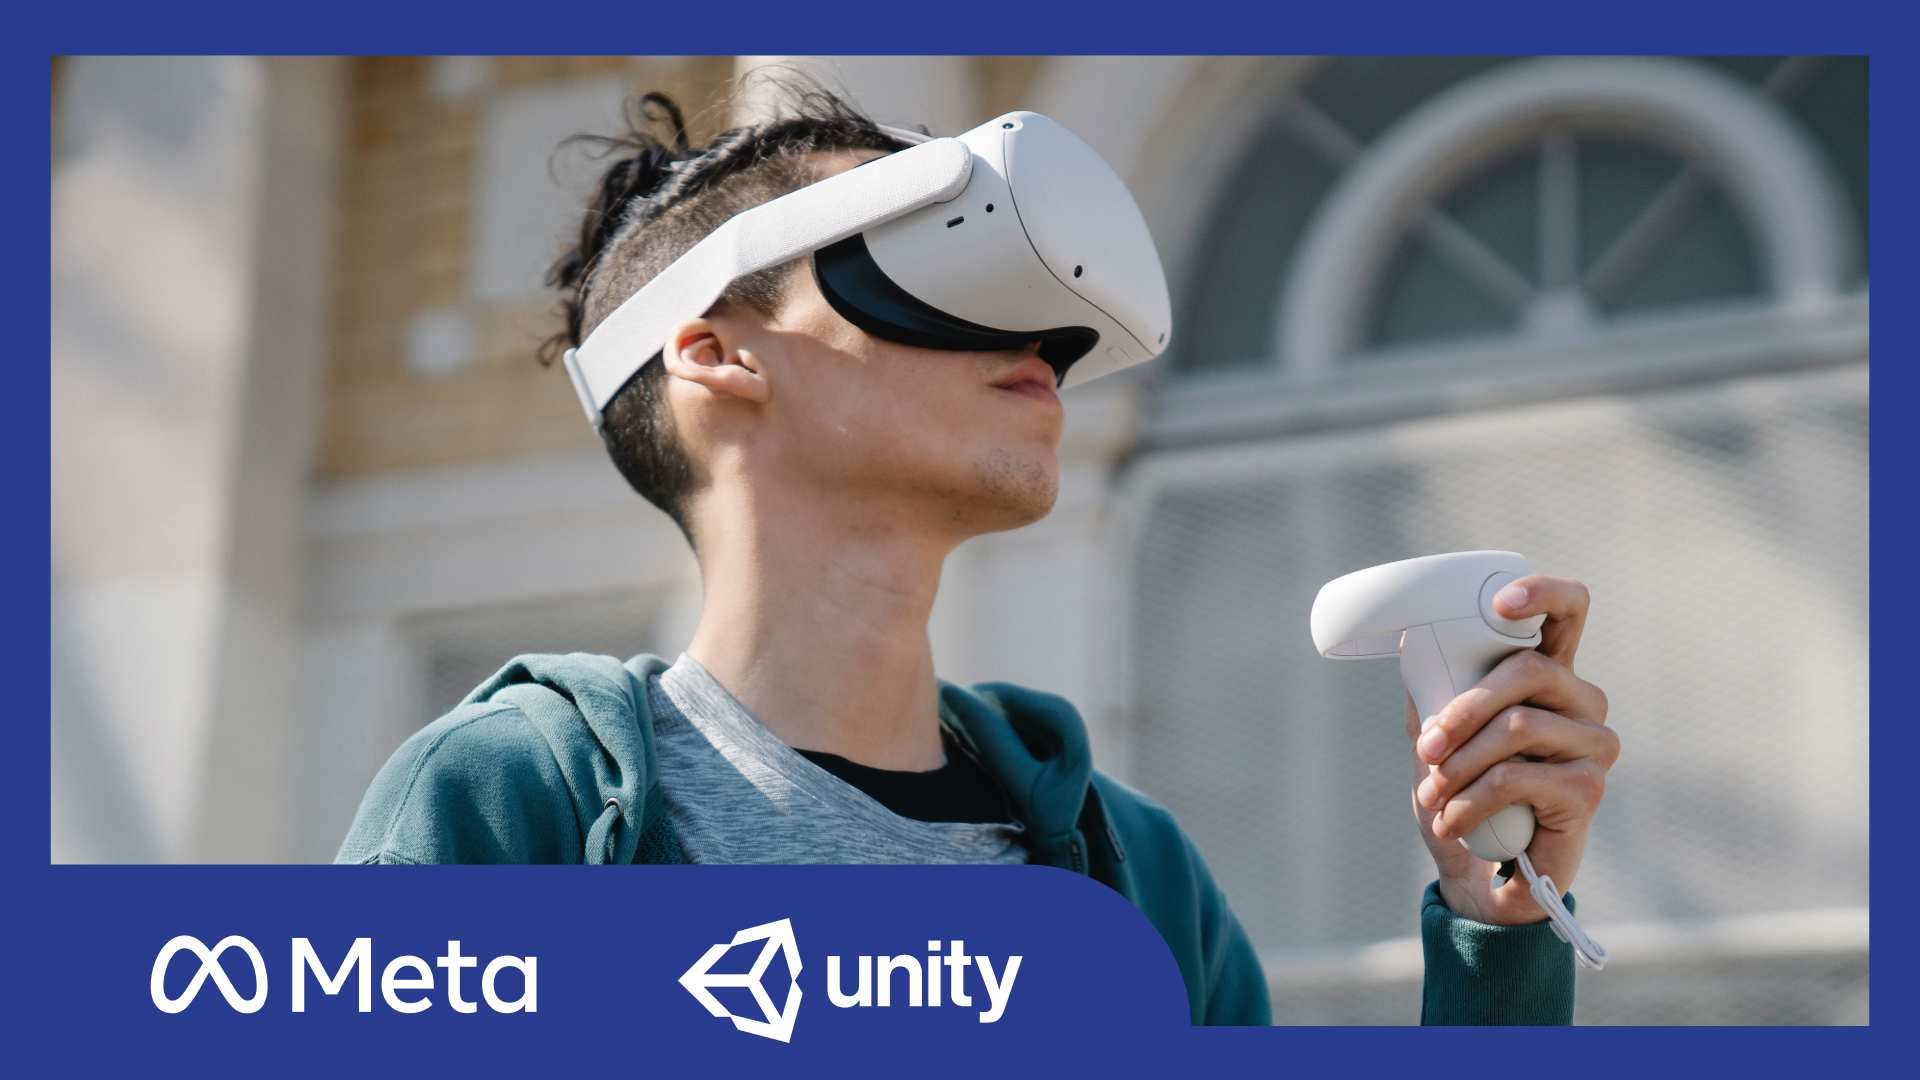 A person wearing a VR headset looks up and holds a controller. Meta and Unity logos.